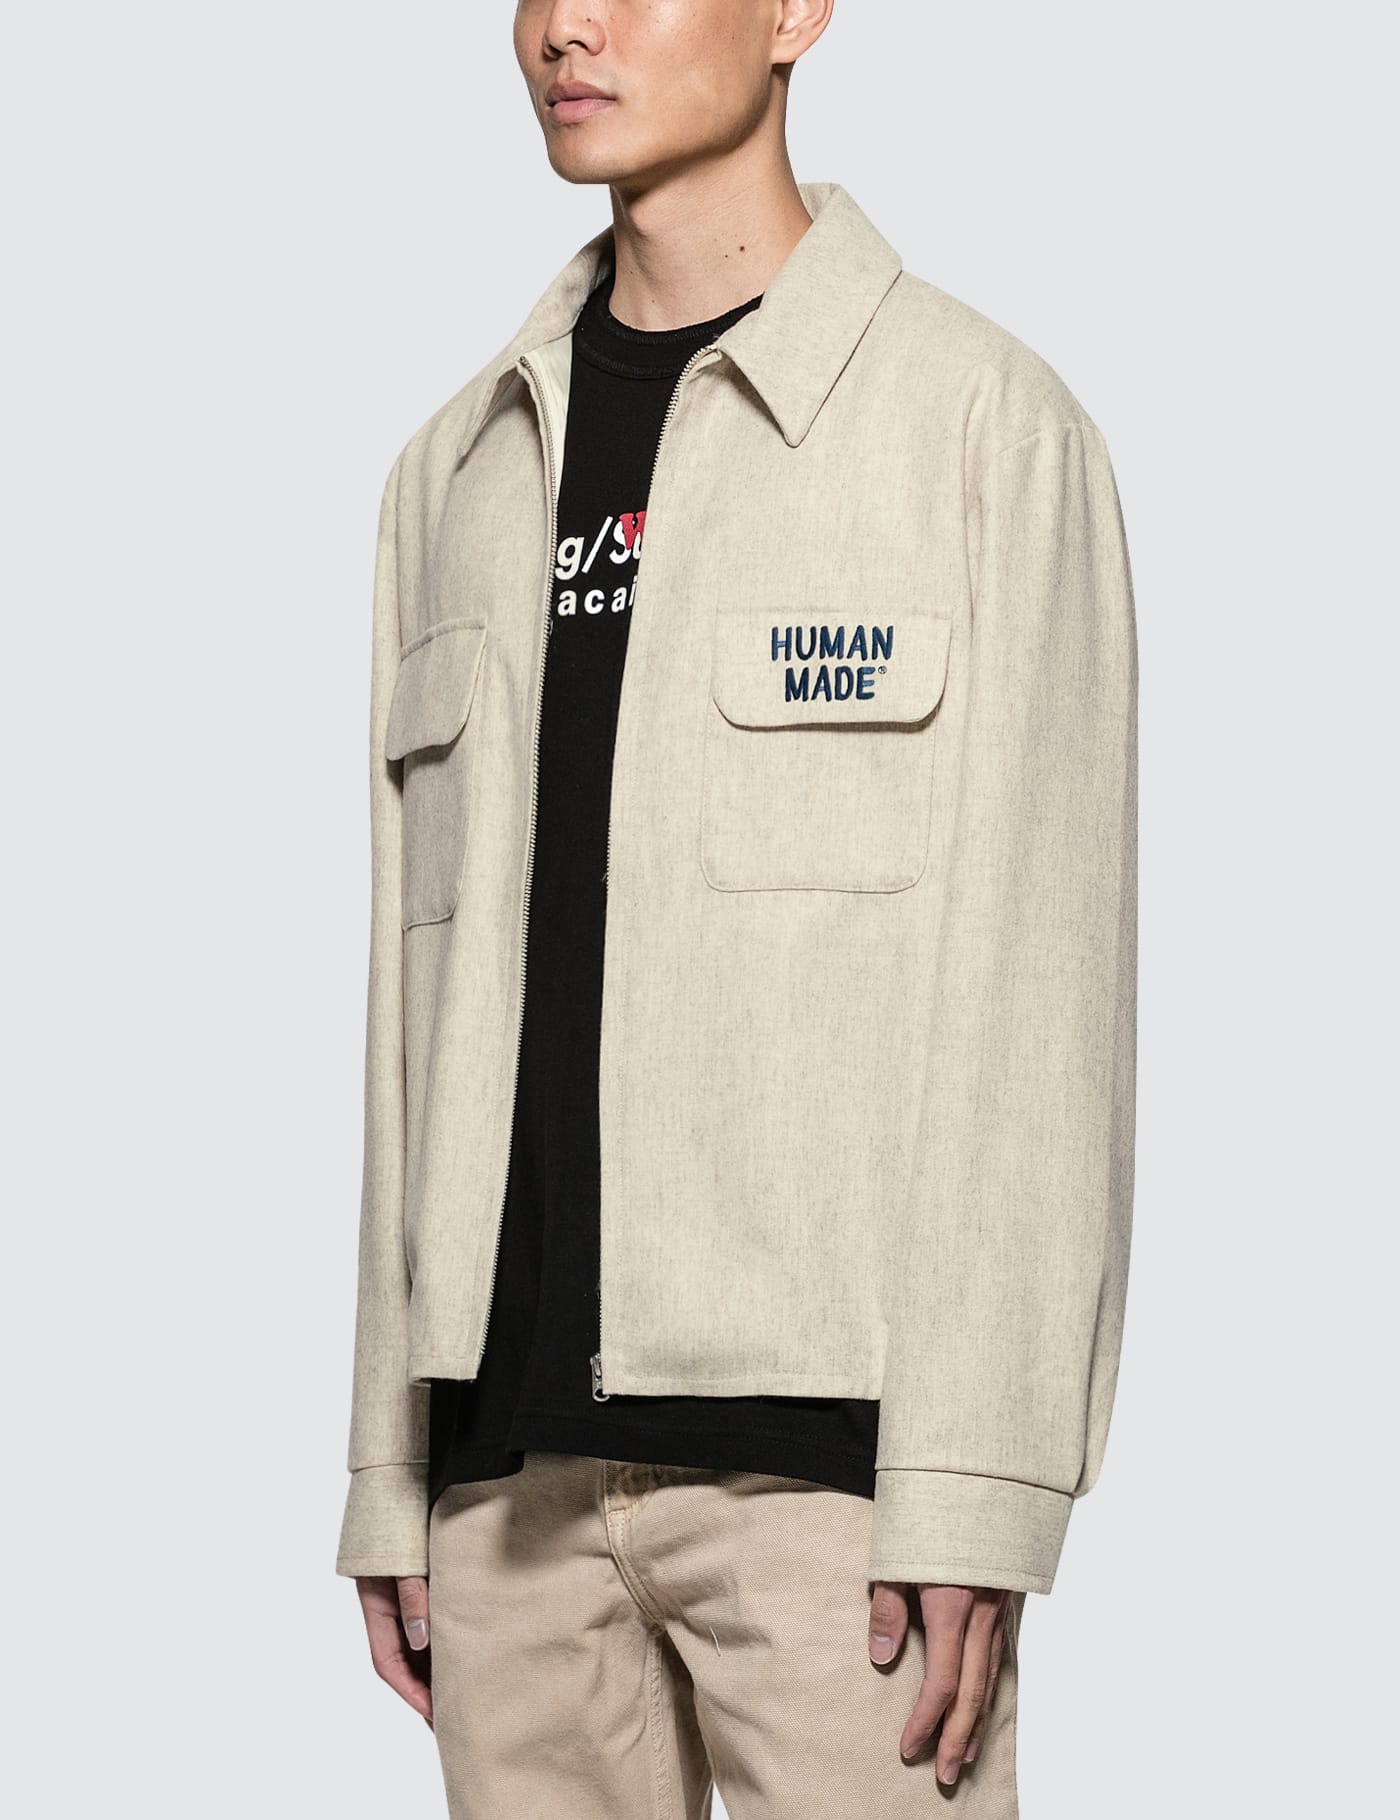 Human Made - Souvenir Jacket | HBX - Globally Curated Fashion and